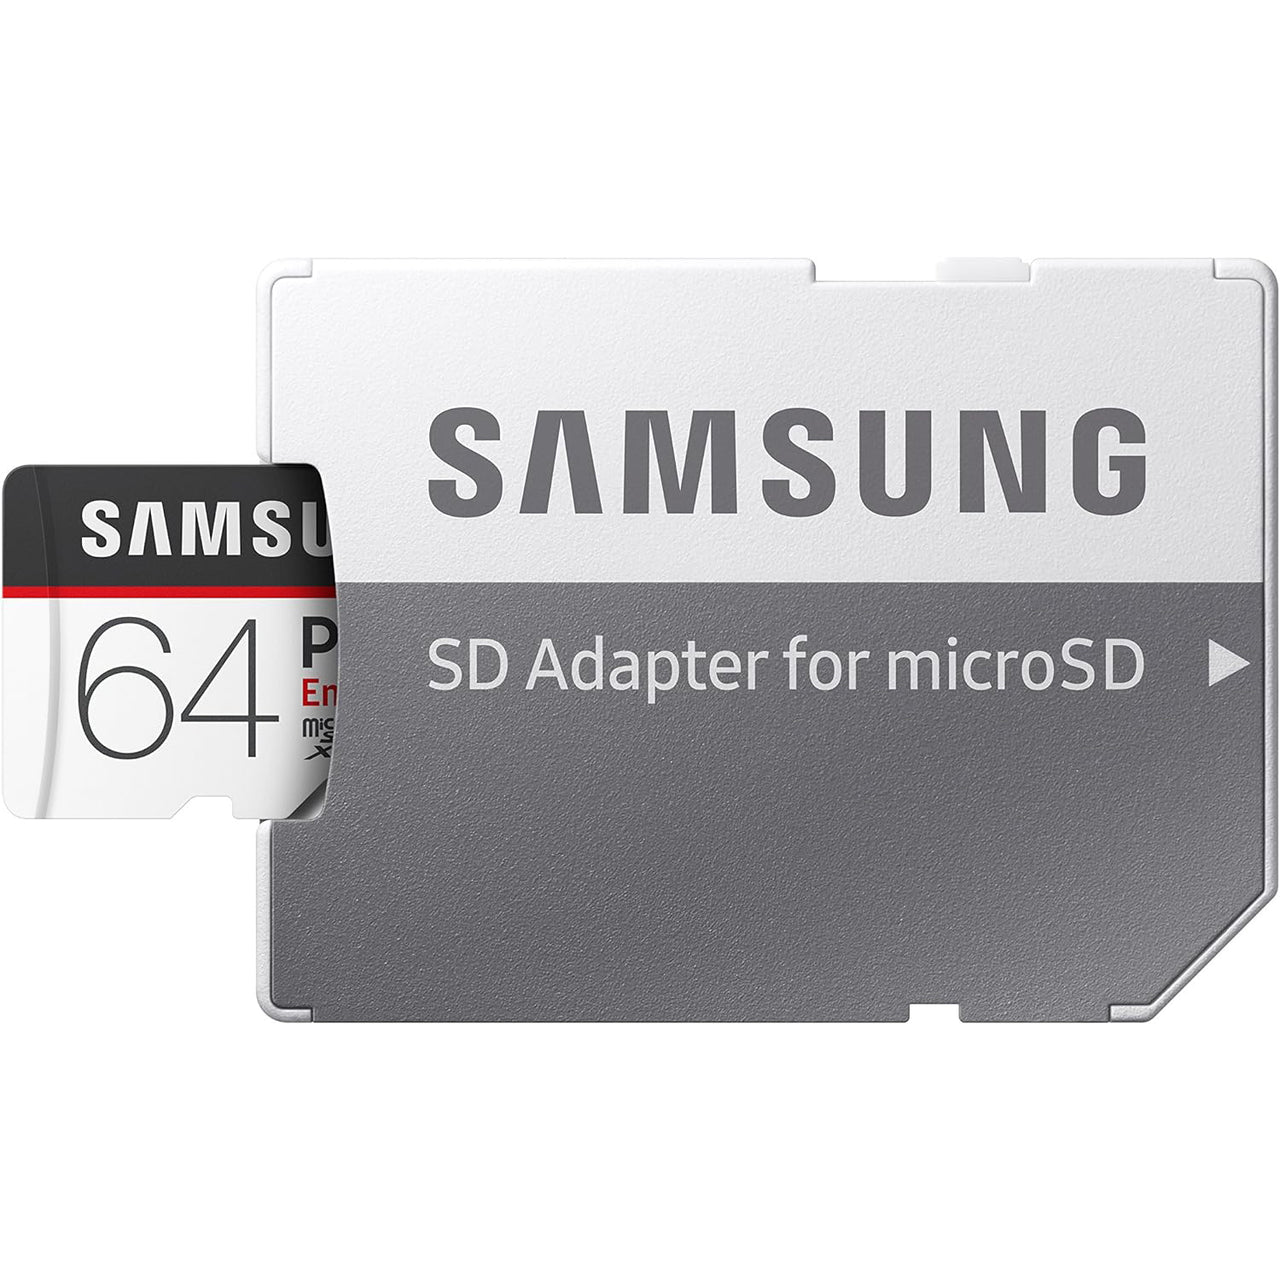 Samsung PRO Endurance microSD Card with Adapter - 64GB |4K|Class 10|UHS-I| 100 MB/s